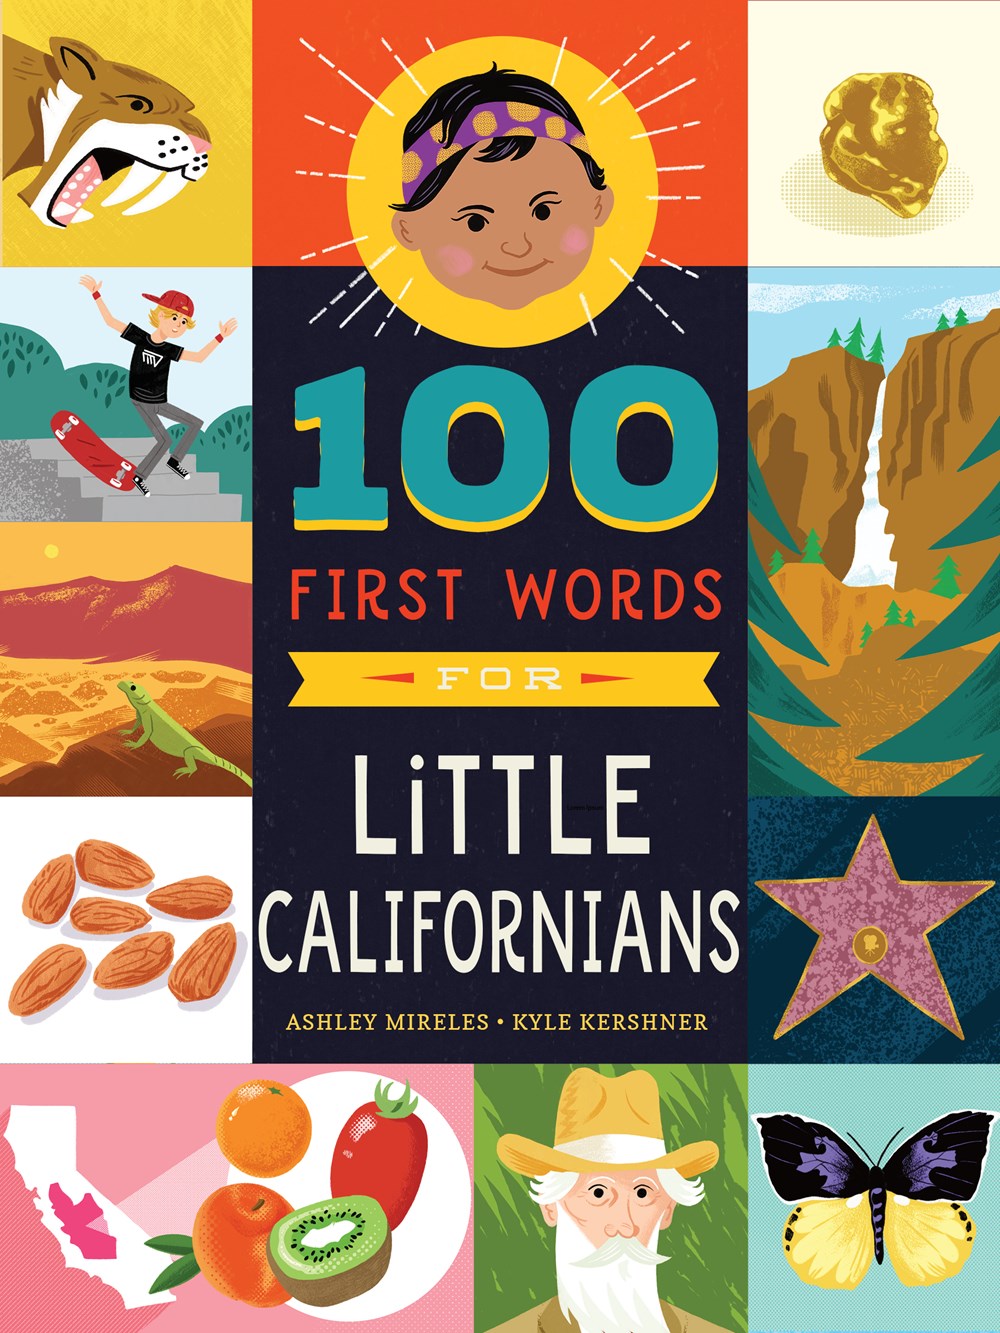 Cover of the book '100 First Words for Little Californians' featuring colorful illustrations of California-themed objects and landmarks, like Golden Gate Bridge, palm trees, and more